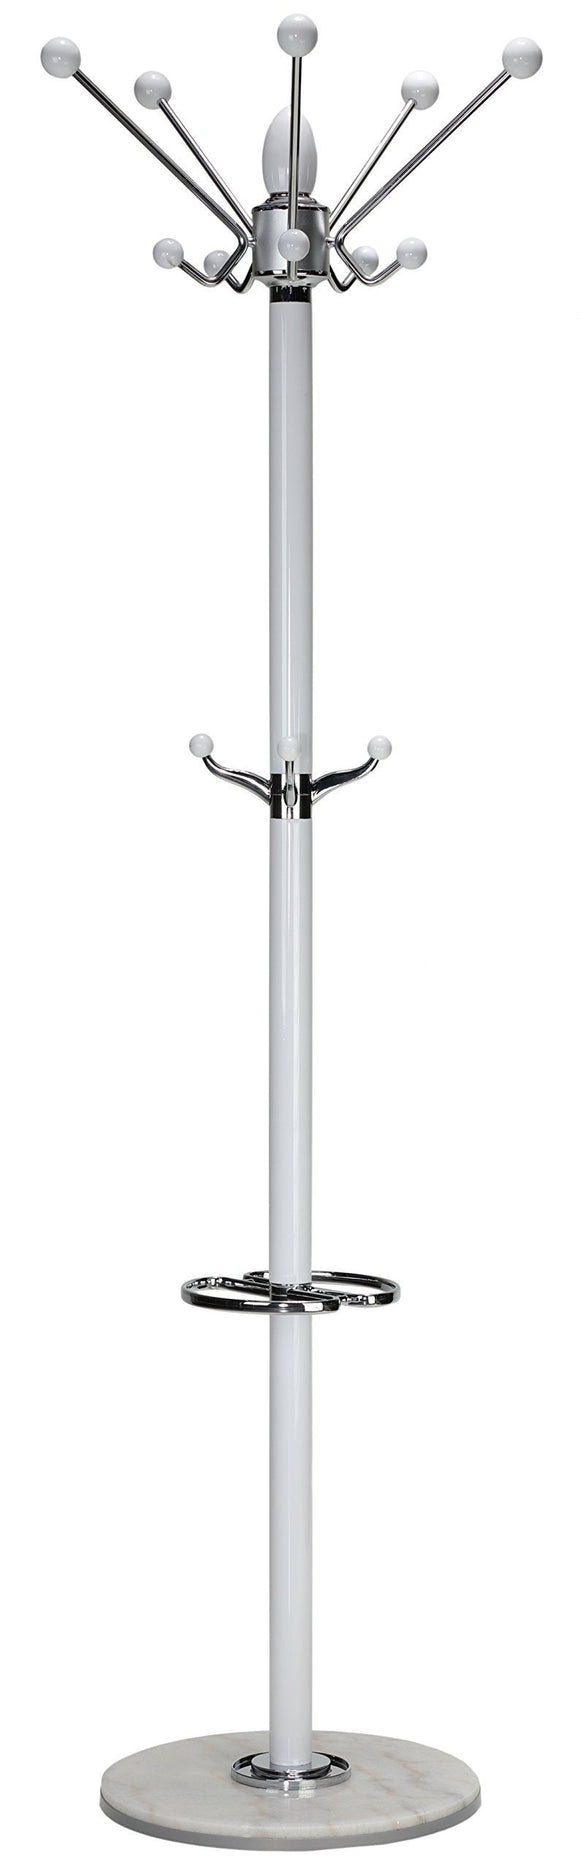 Cortesi Home Lava Coat Rack in White Lacquer Wood and Chrome Accents, White Marble